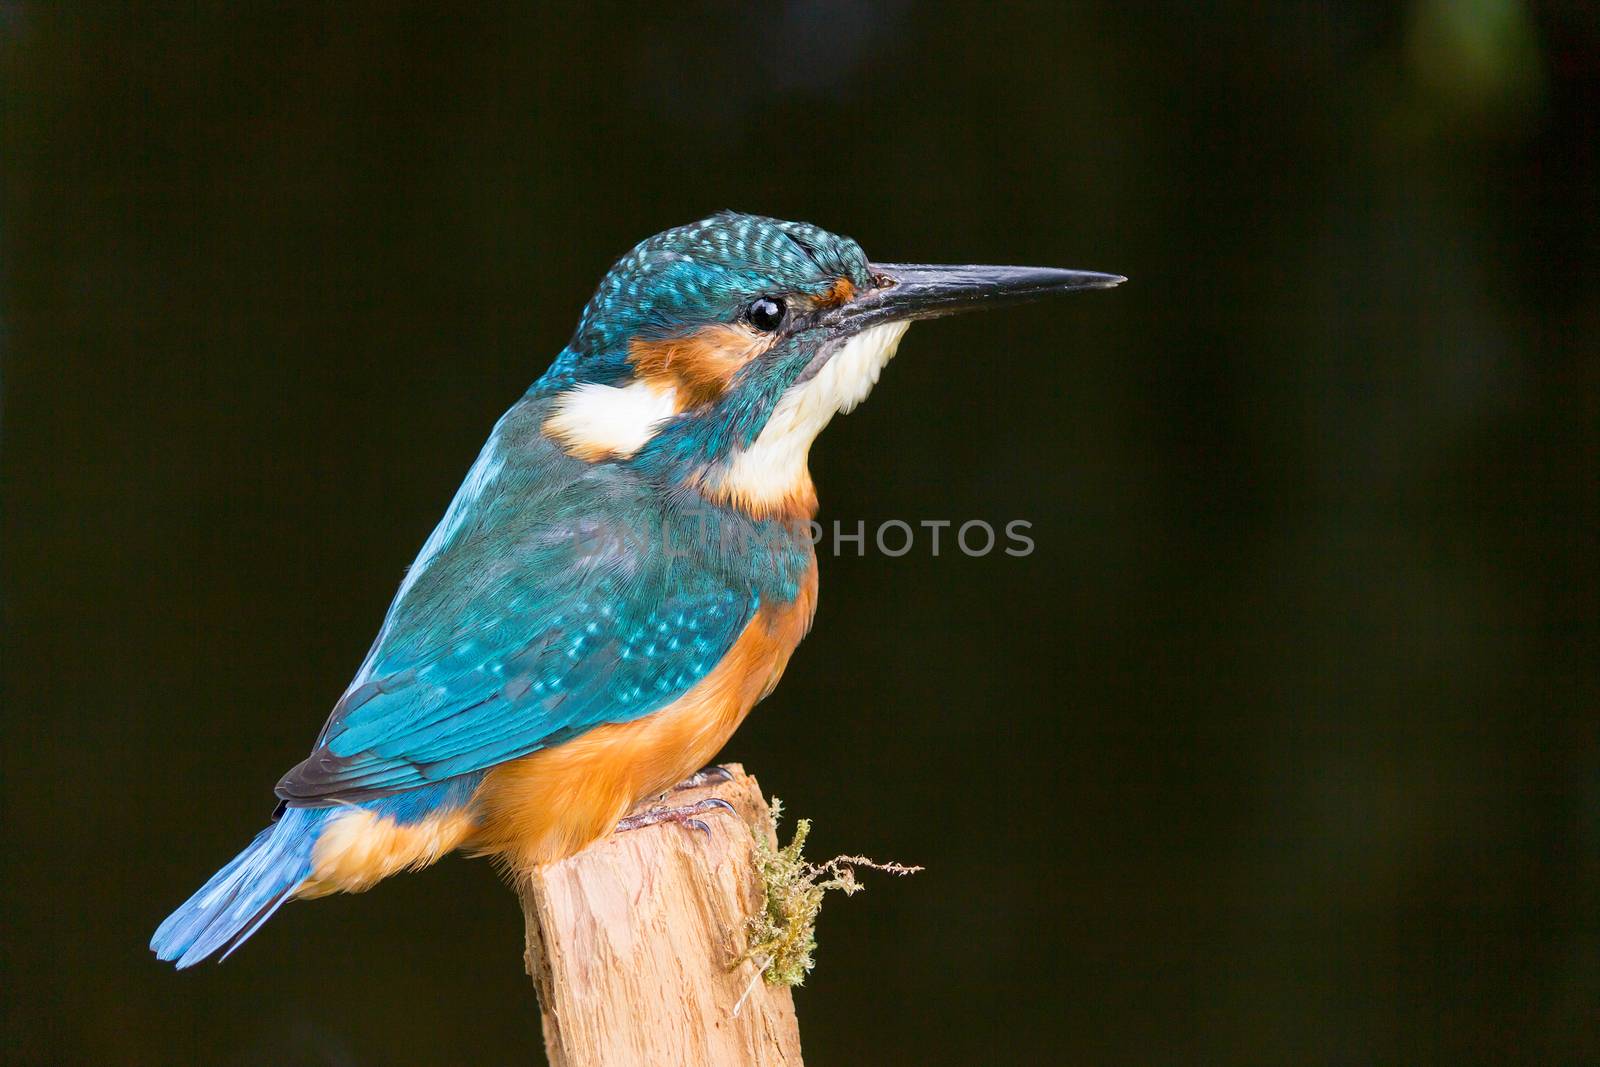 Kingfisher on a stick by BenSchonewille